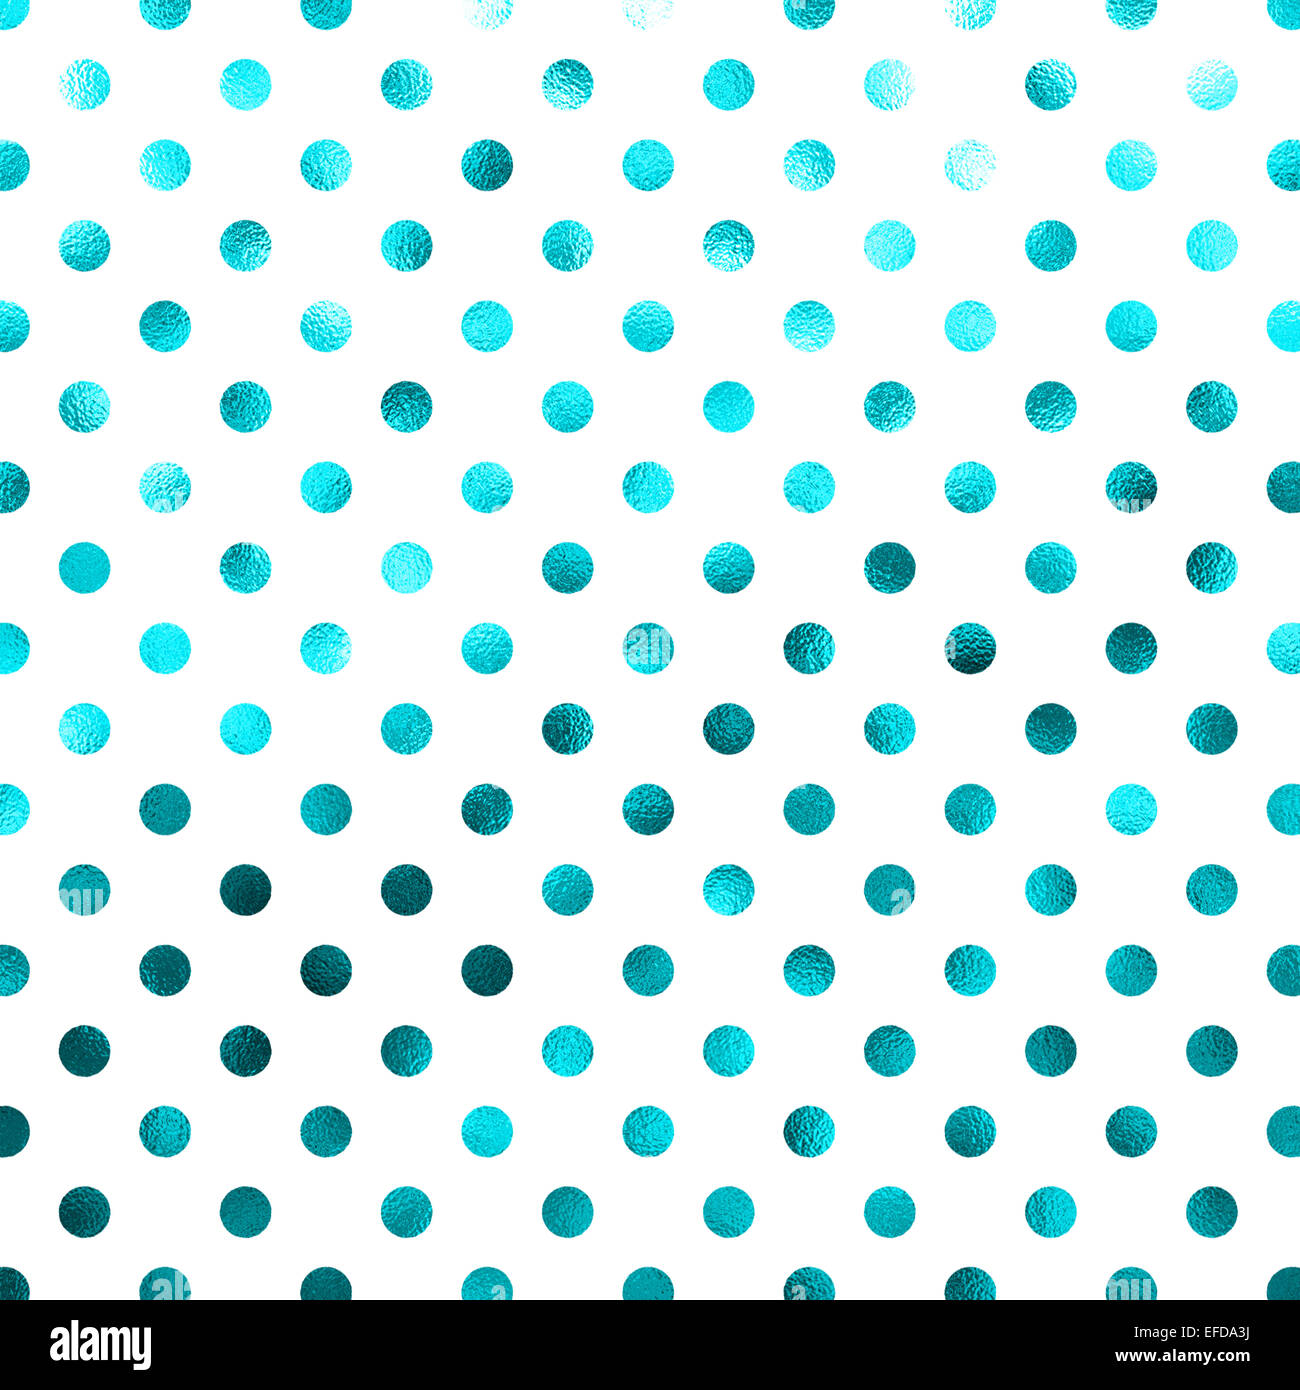 Blue Teal Turquoise White Polka Dot Pattern Swiss Dots Texture Digital Paper Background Stock Photo